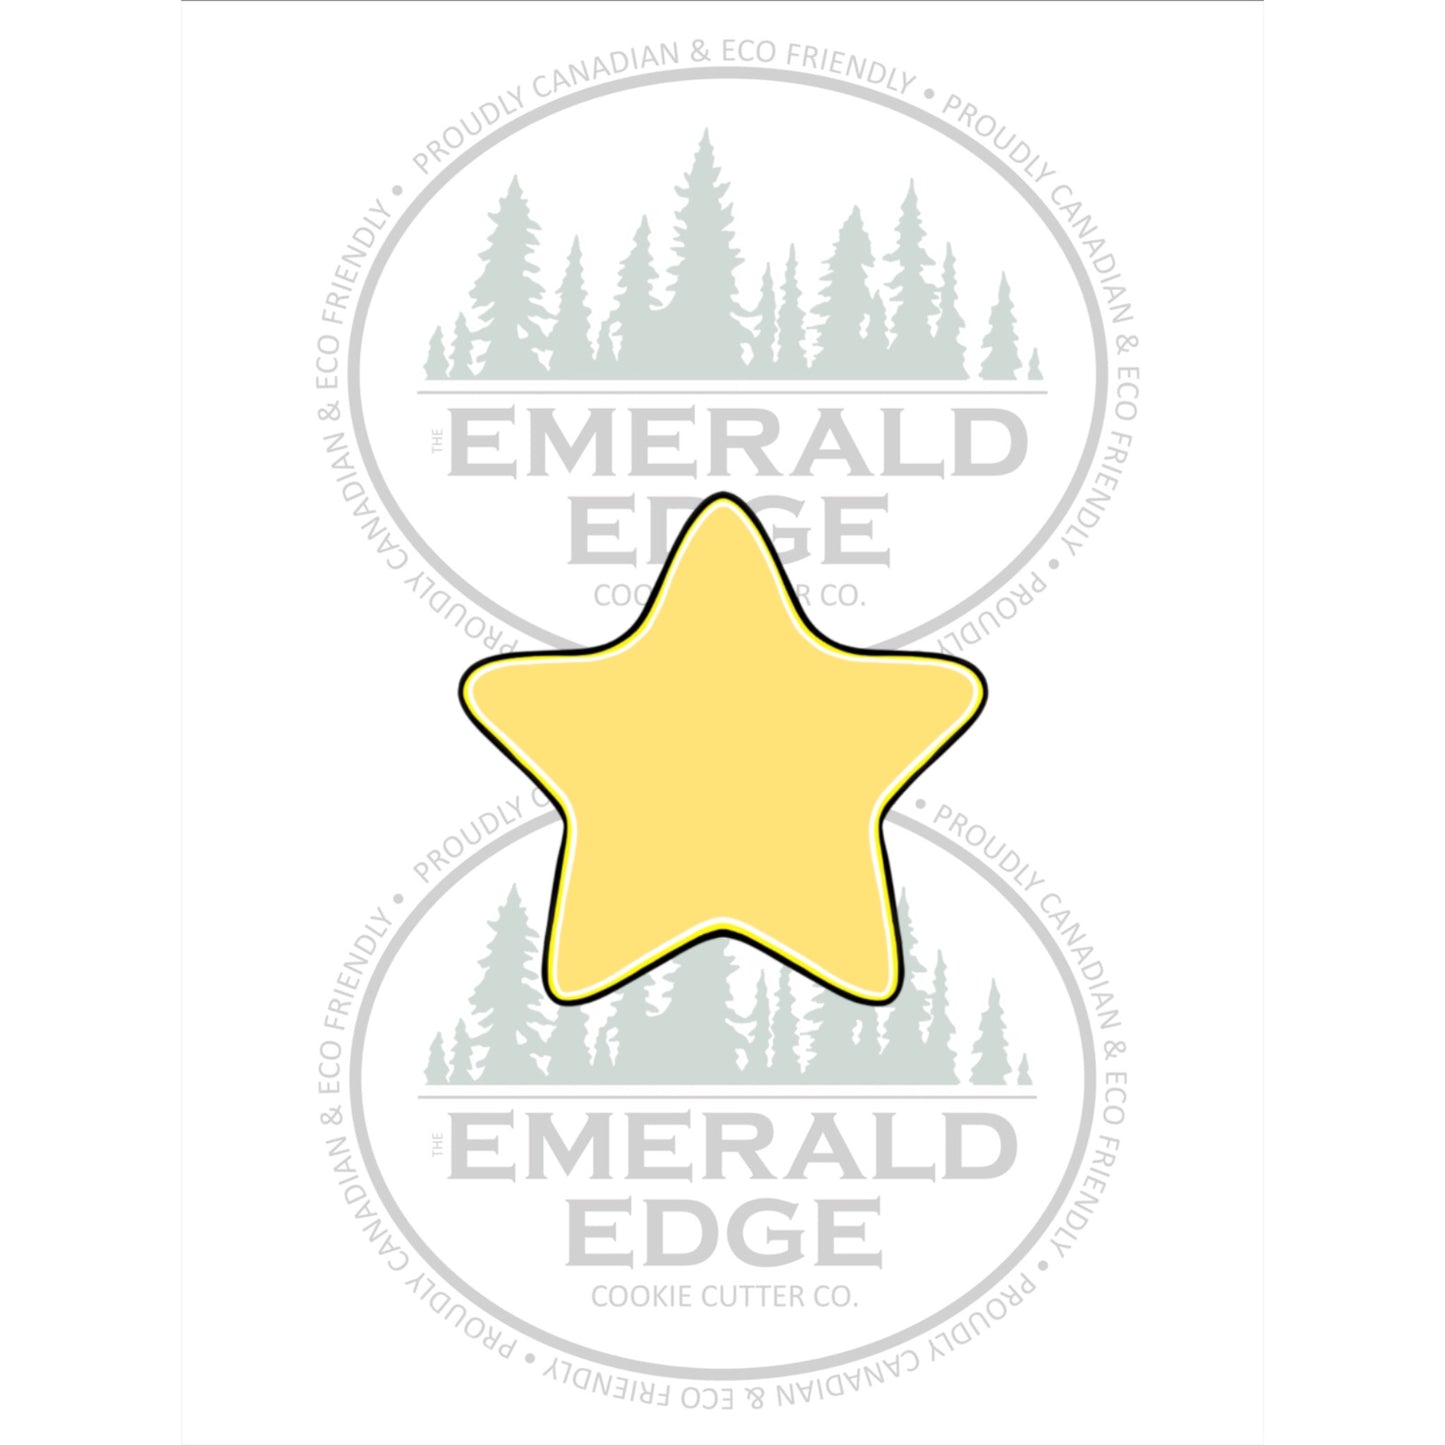 Rounded Star